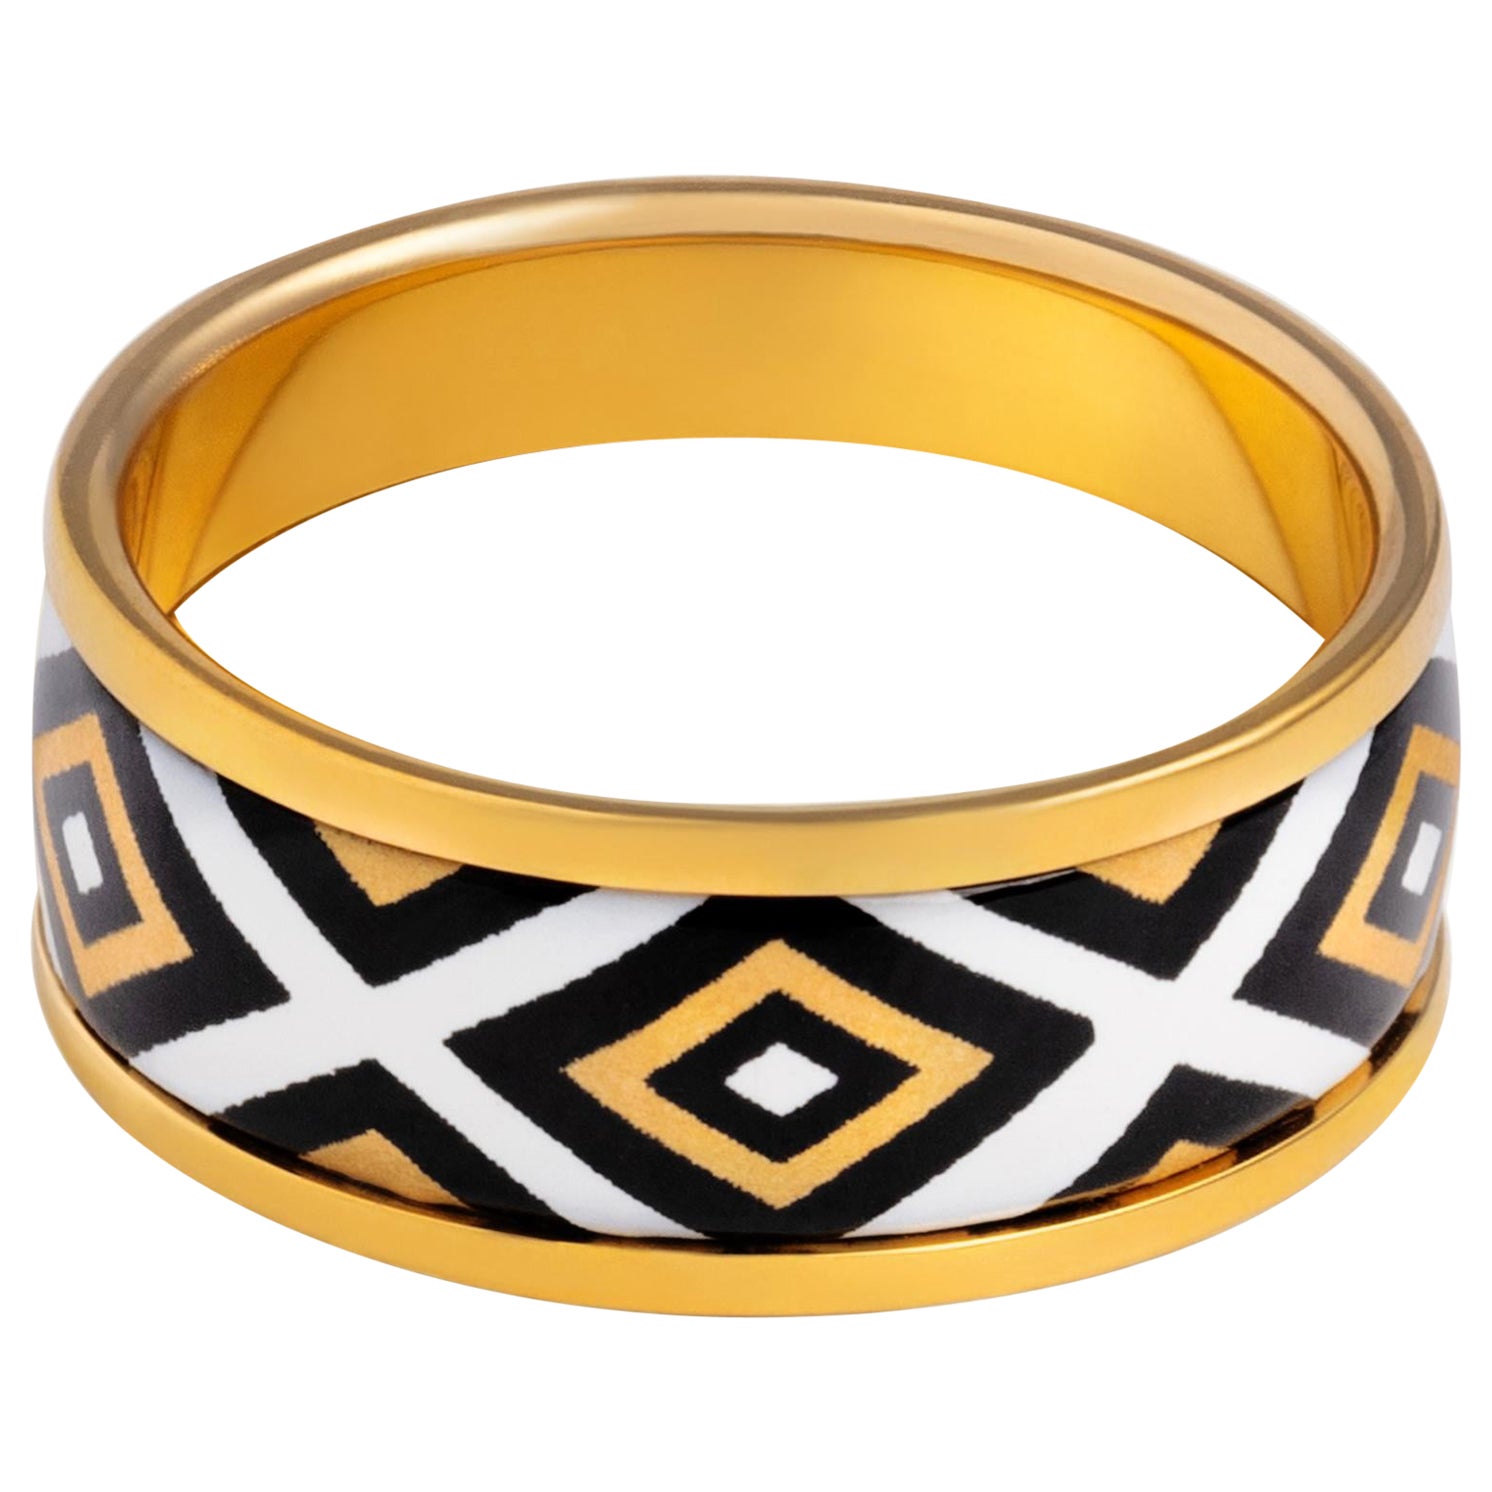 Hand-Painted Gold-Plated Stainless Steel Band Ring with Fire Enamel Detail